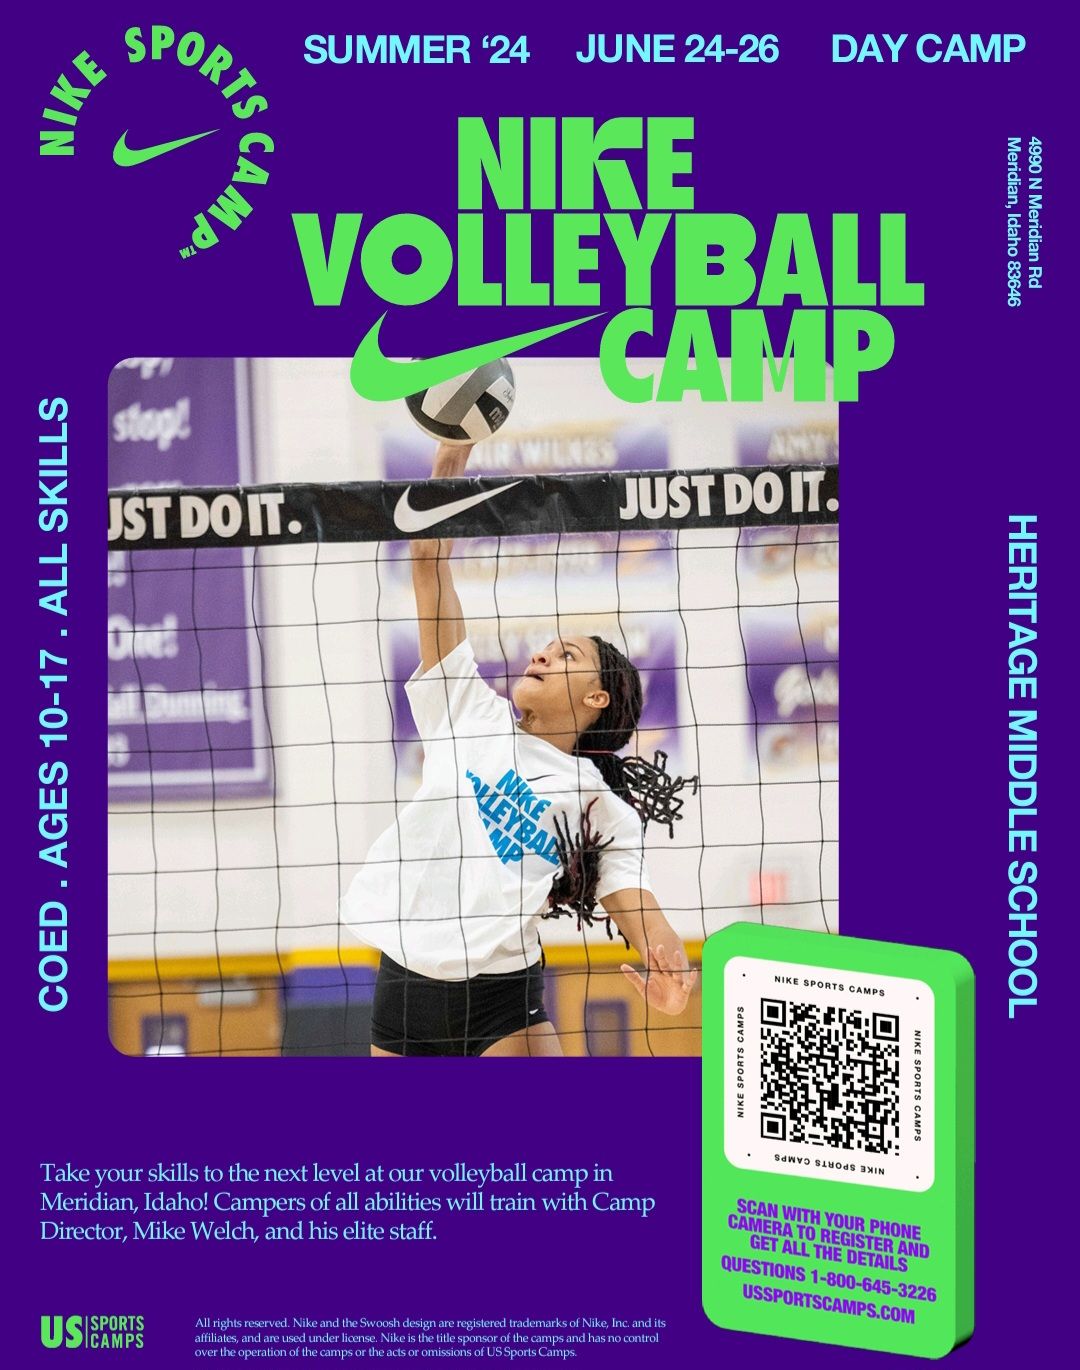 Nike Volleyball Camp at Heritage Middle School (Meridian Idaho)